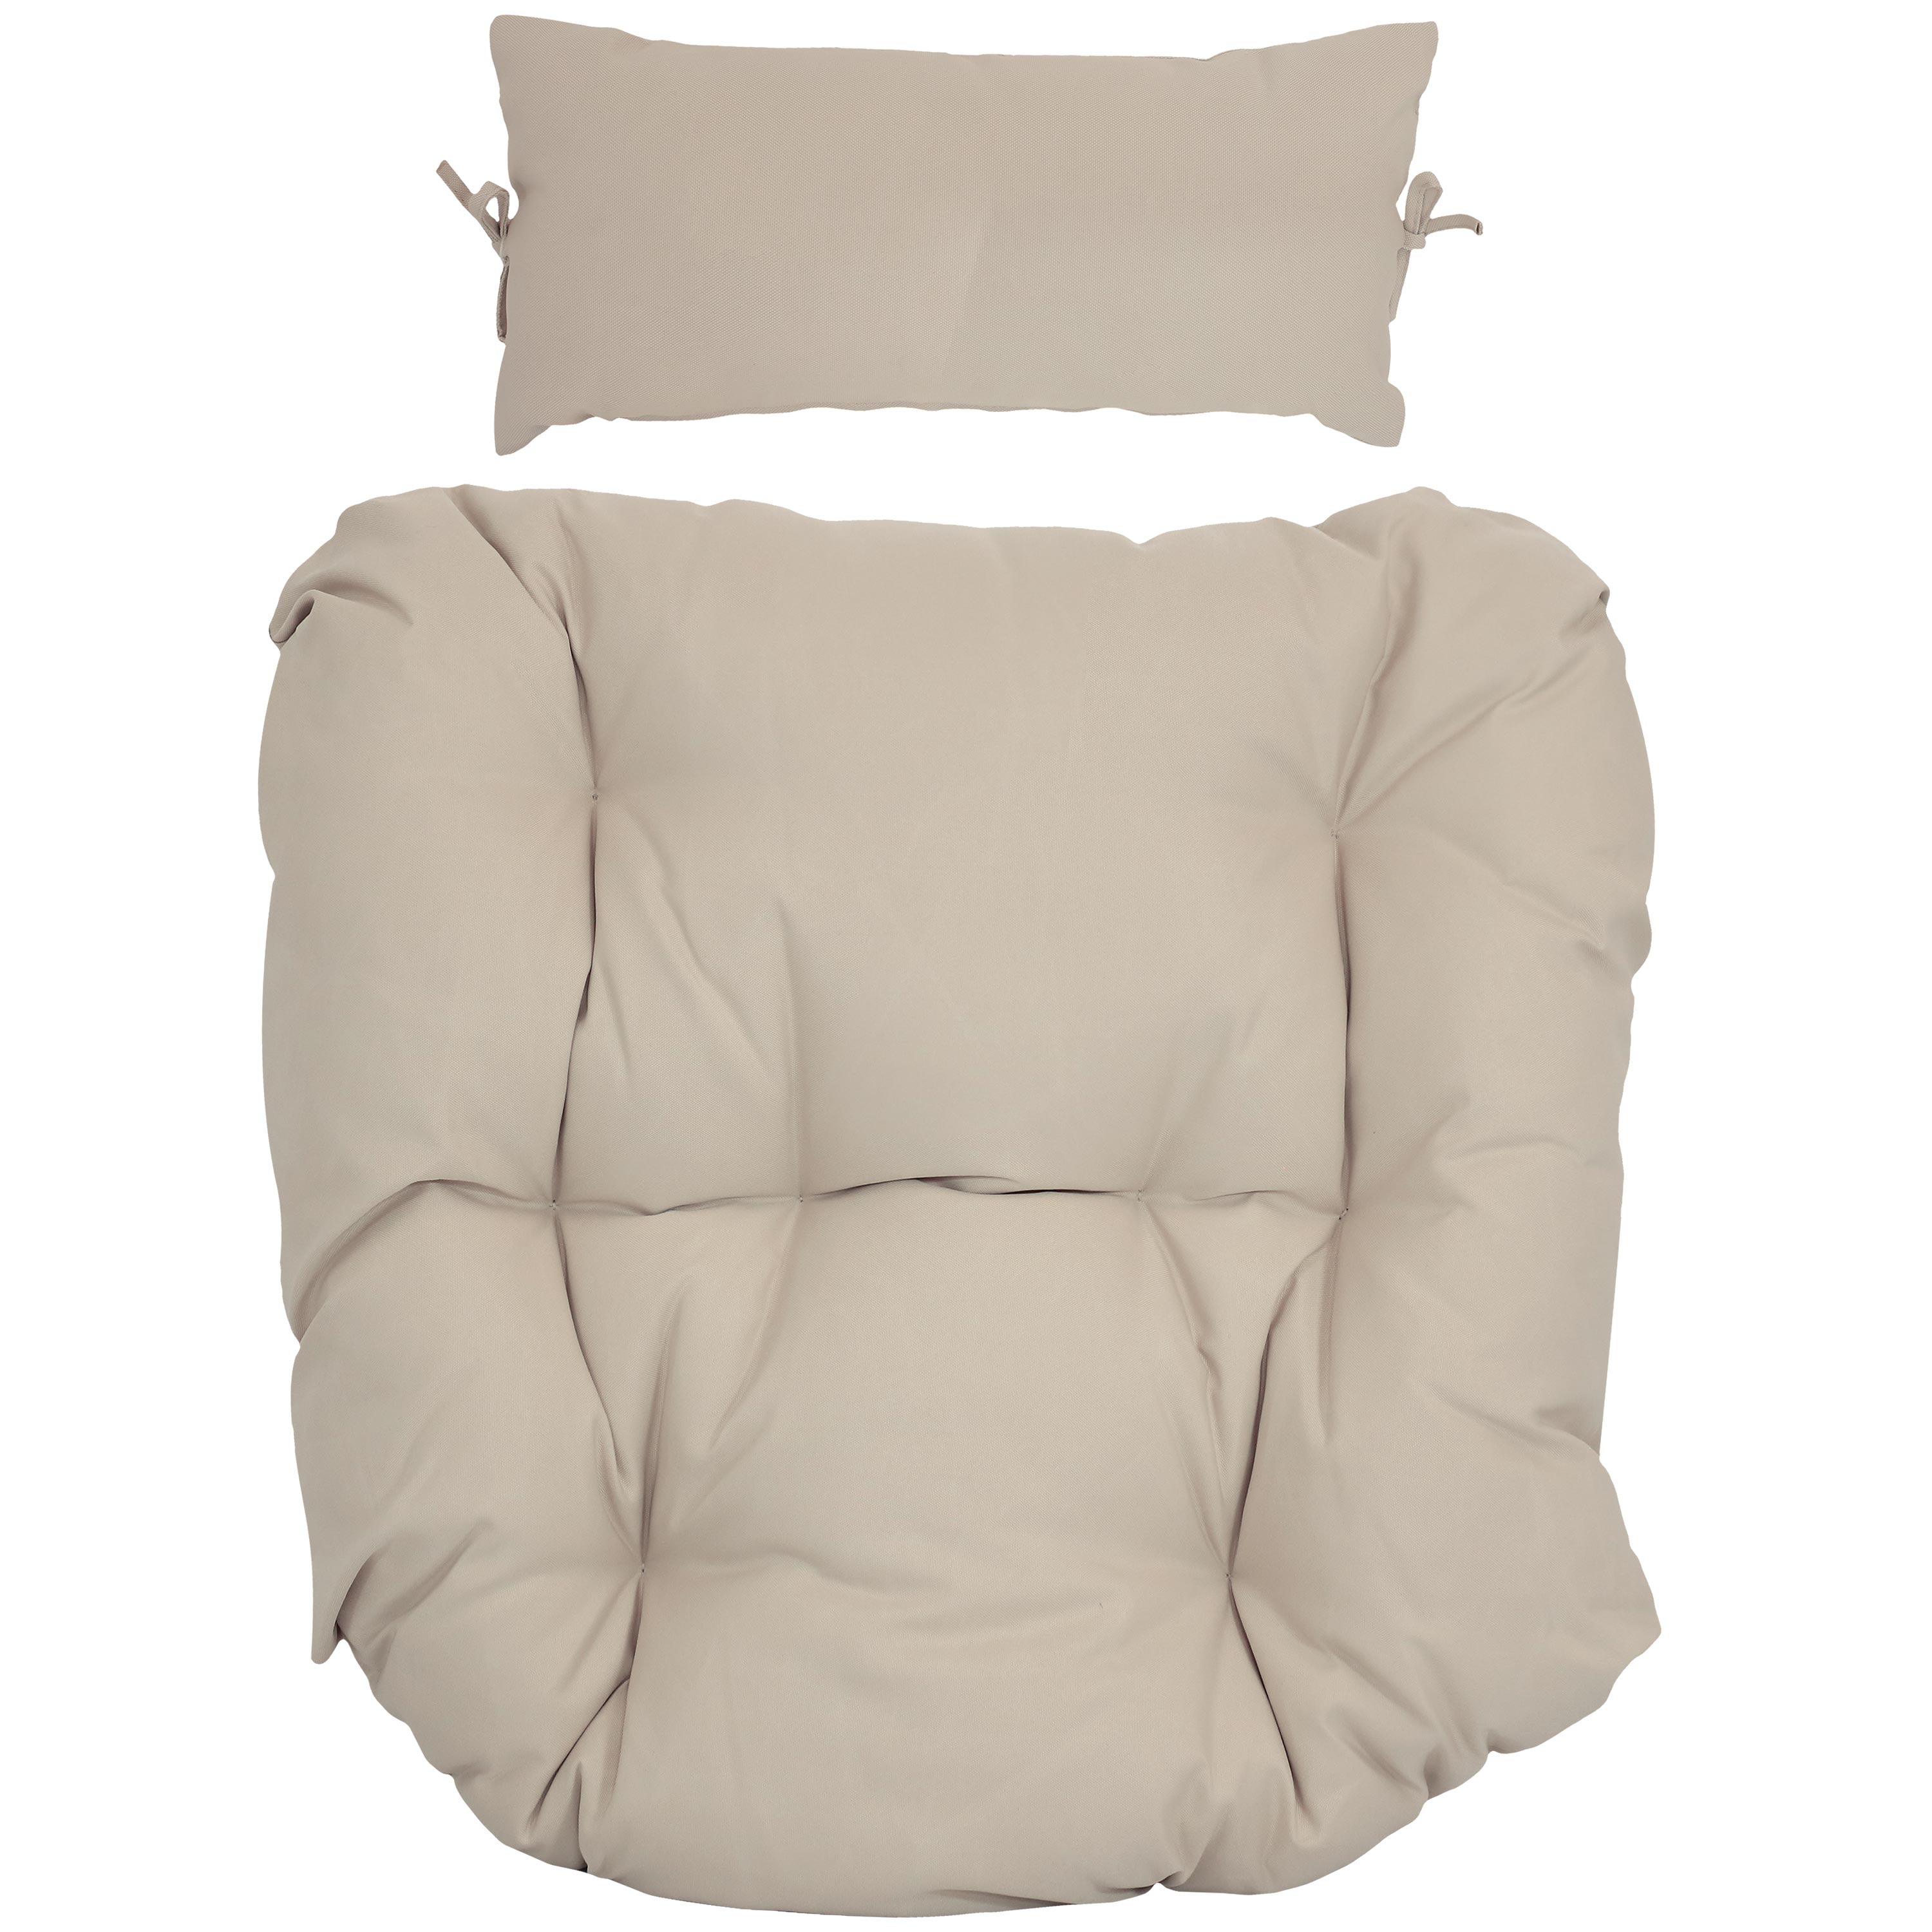 Sunnydaze Egg Chair Cushion Replacement with Head Pillow